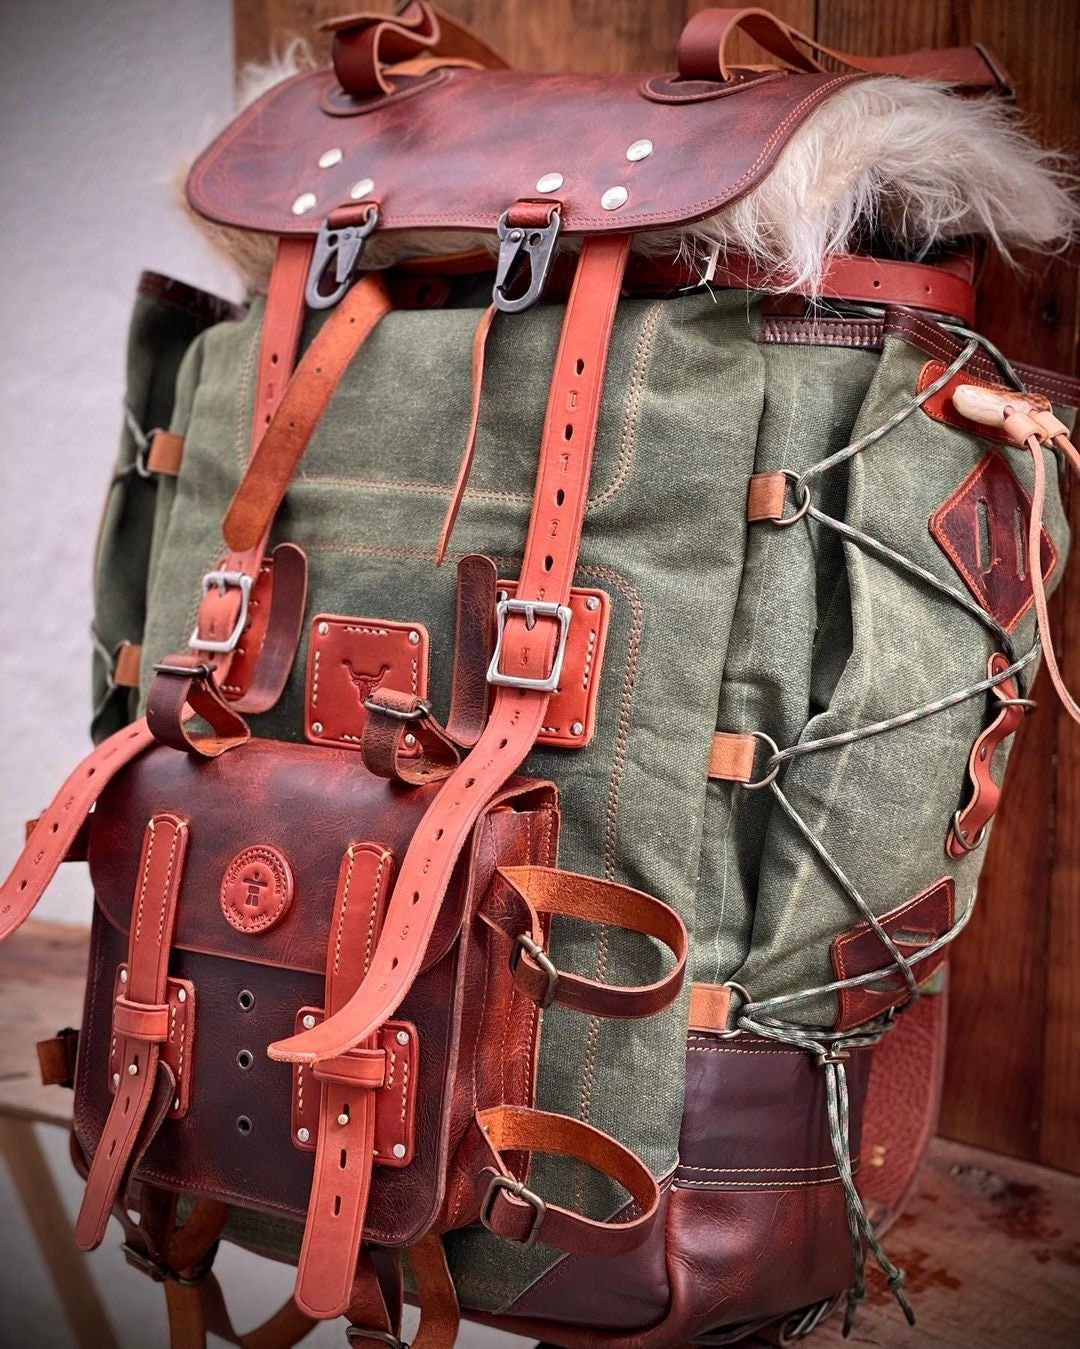 Custom | Limited discount | 45L | Handmade Leather backpack | Waxed Canvas Backpack | Travel, Camping, Bushcraft | Personalization bushcraft - camping - hiking backpack 99percenthandmade   